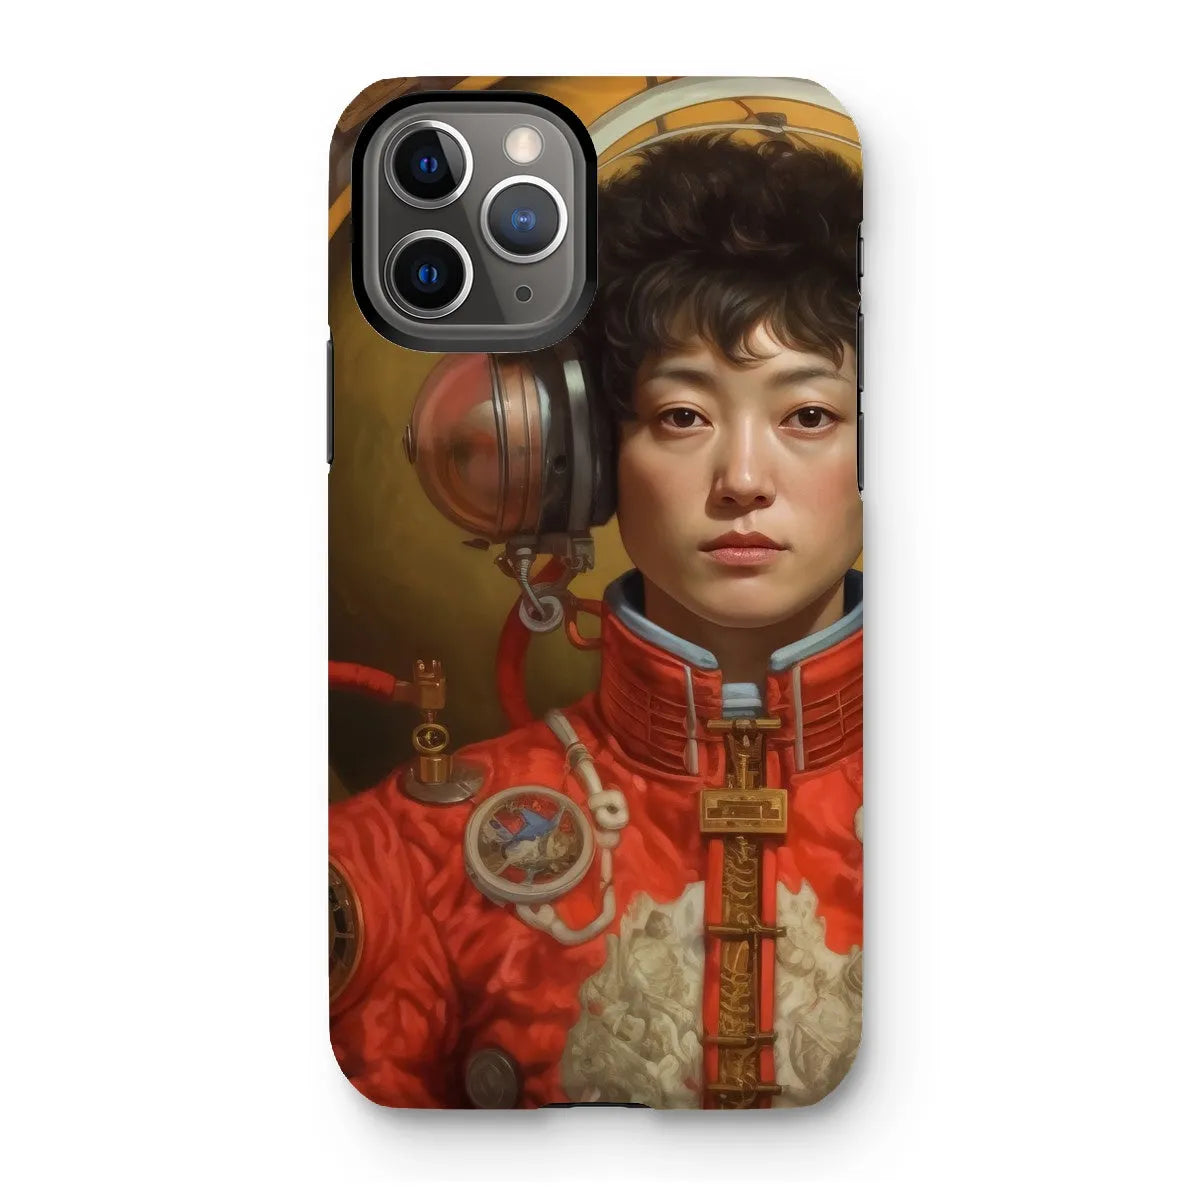 Mùchén - Gay Chinese Astronaut Aesthetic Phone Case - Iphone 11 Pro / Matte - Mobile Phone Cases - Aesthetic Art